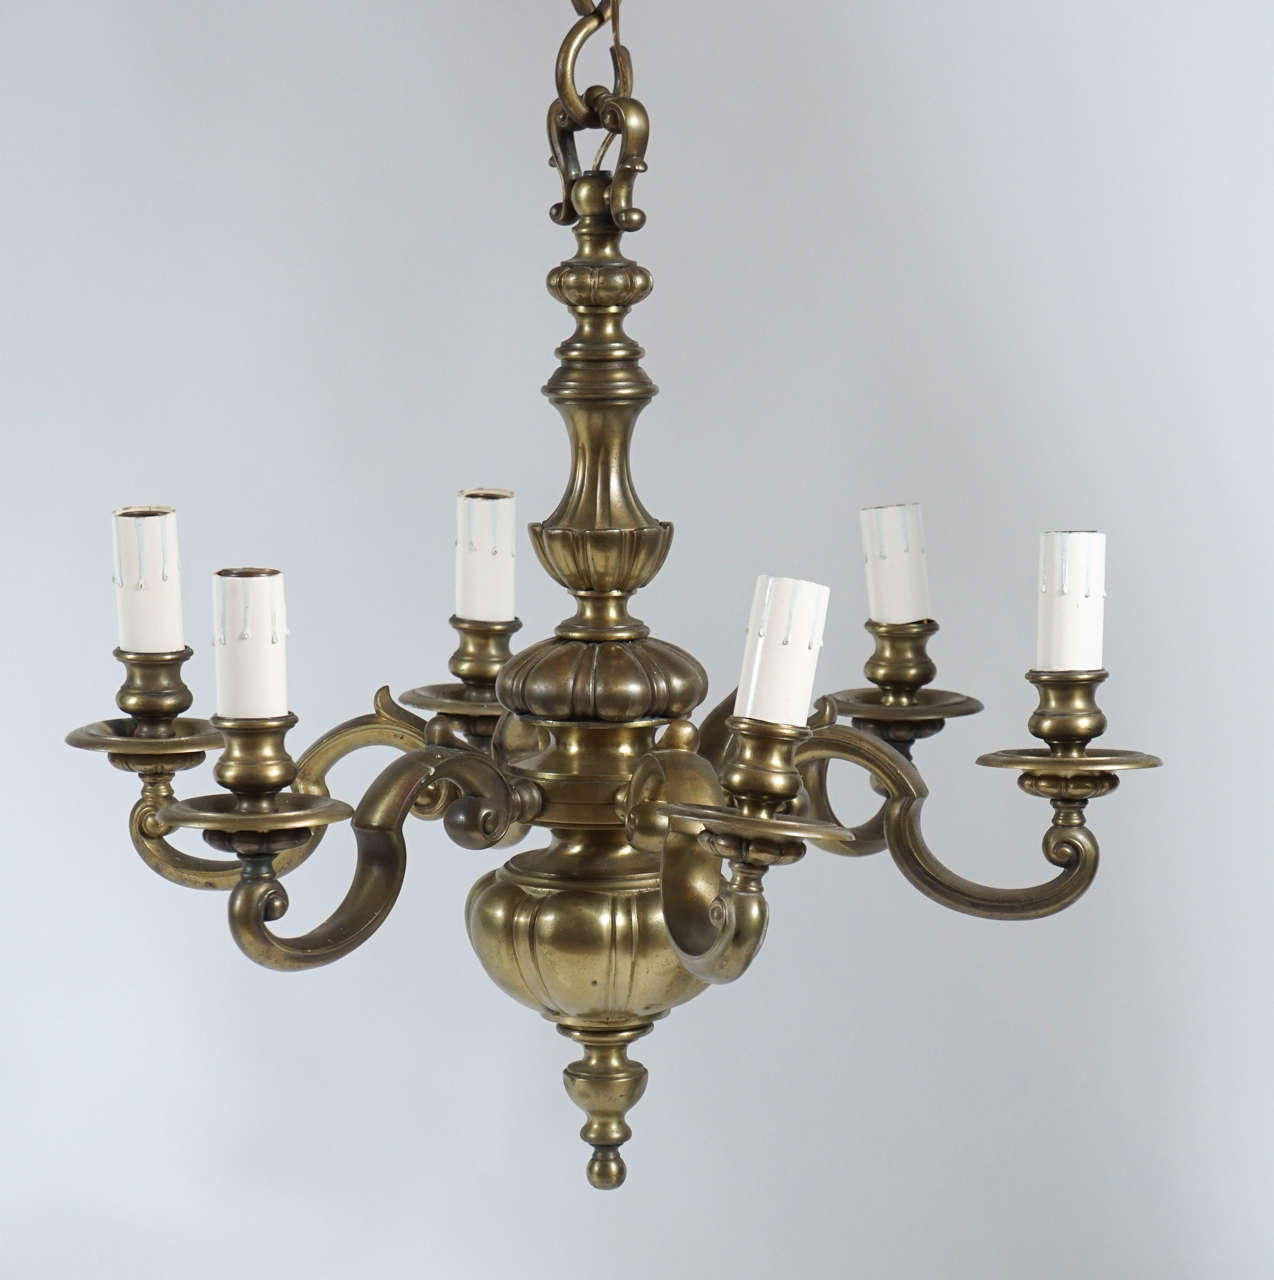 English baroque style solid bronze six light chandelier having six cusped scroll arms on gadrooned and fluted main body.  Wonderful colour and patina.  Photos show a skewed arm, however all arms can be positioned as desired as they swivel.  Body